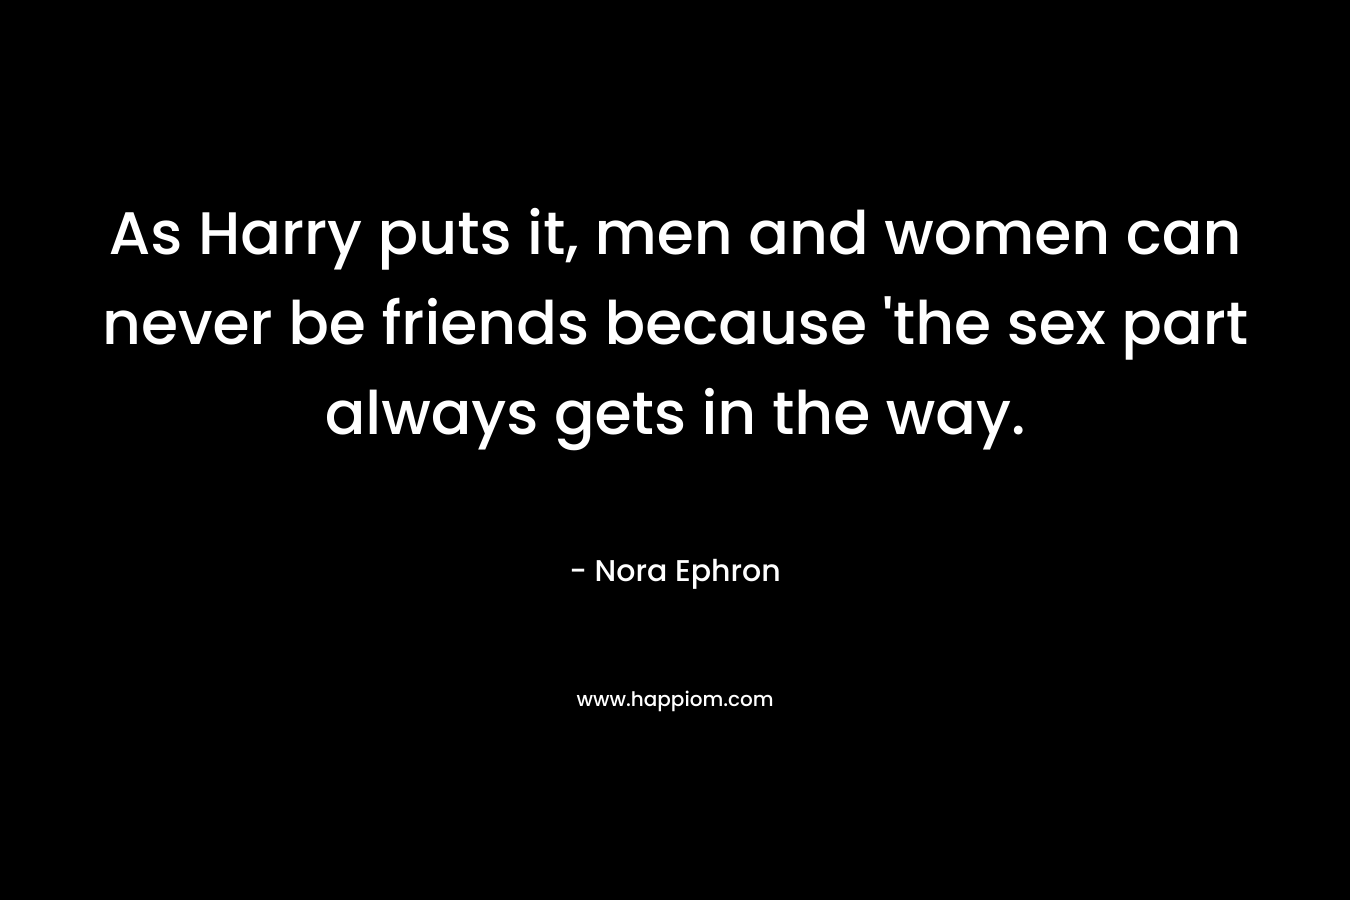 As Harry puts it, men and women can never be friends because 'the sex part always gets in the way.